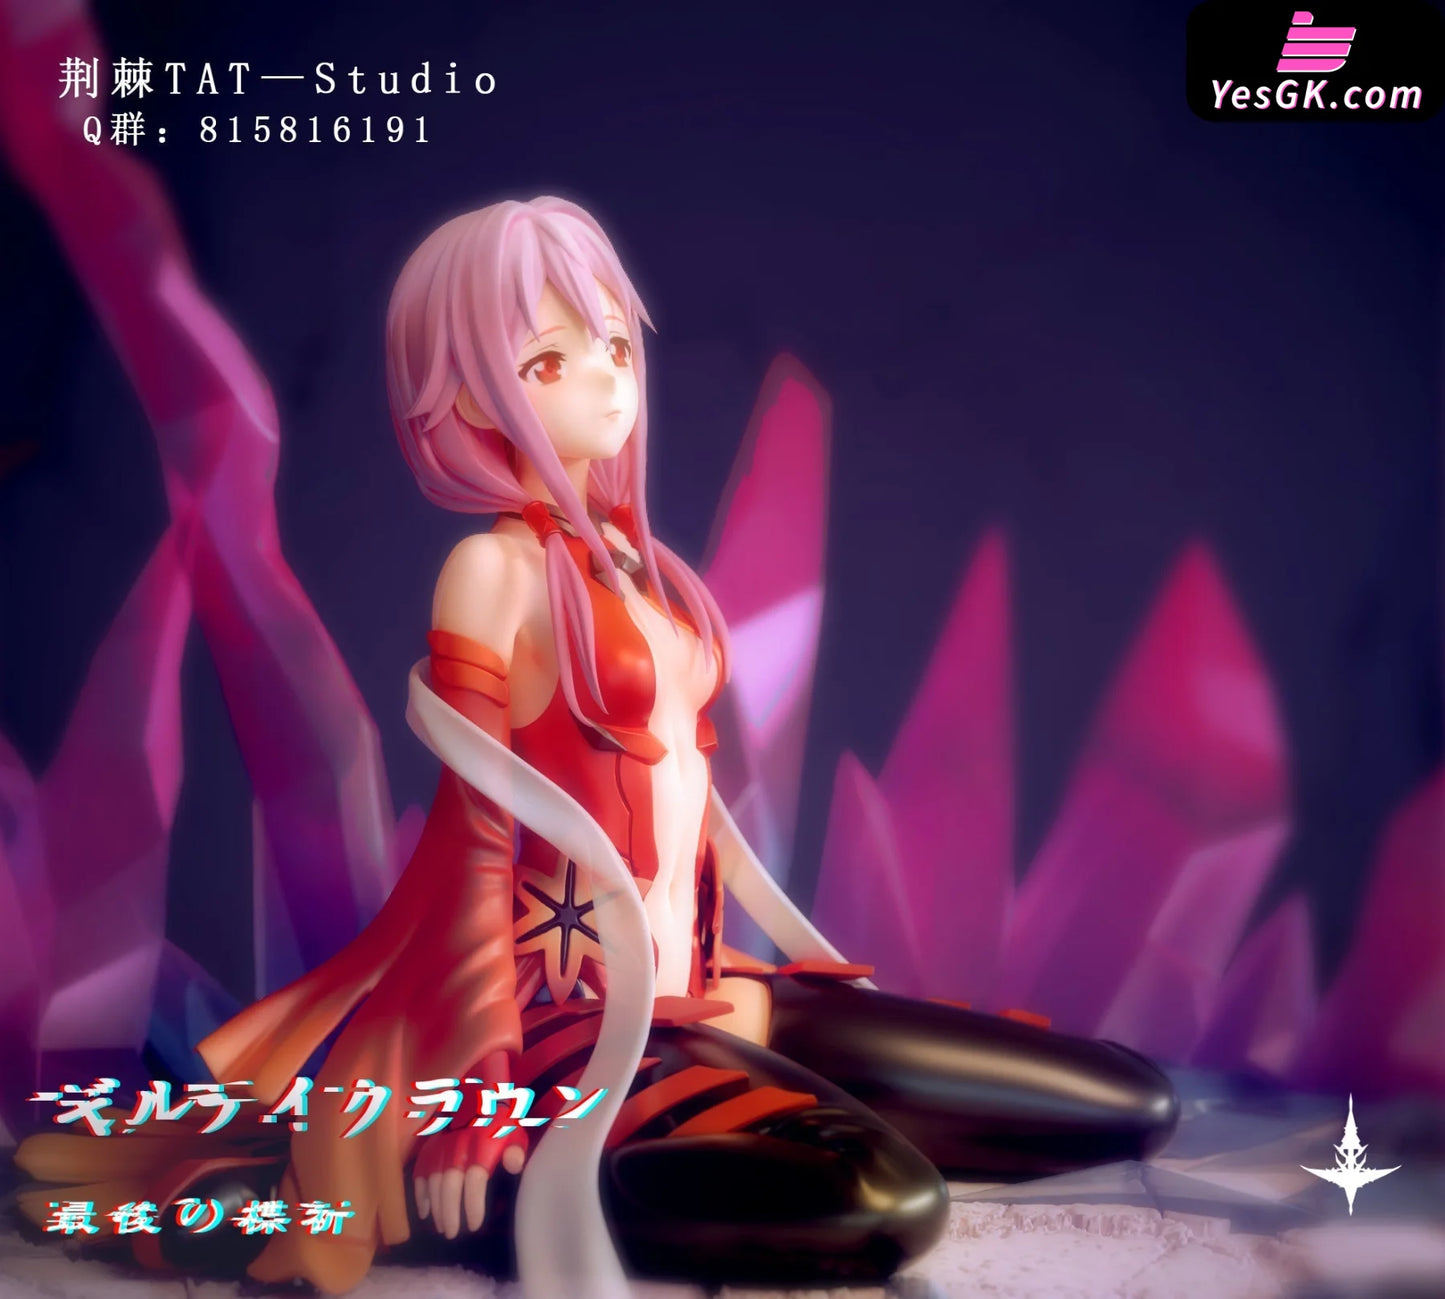 Guilty Crown Inori Yuzuriha Statue - Thistles And Thorns Studio [Pre-Order] Other Animes